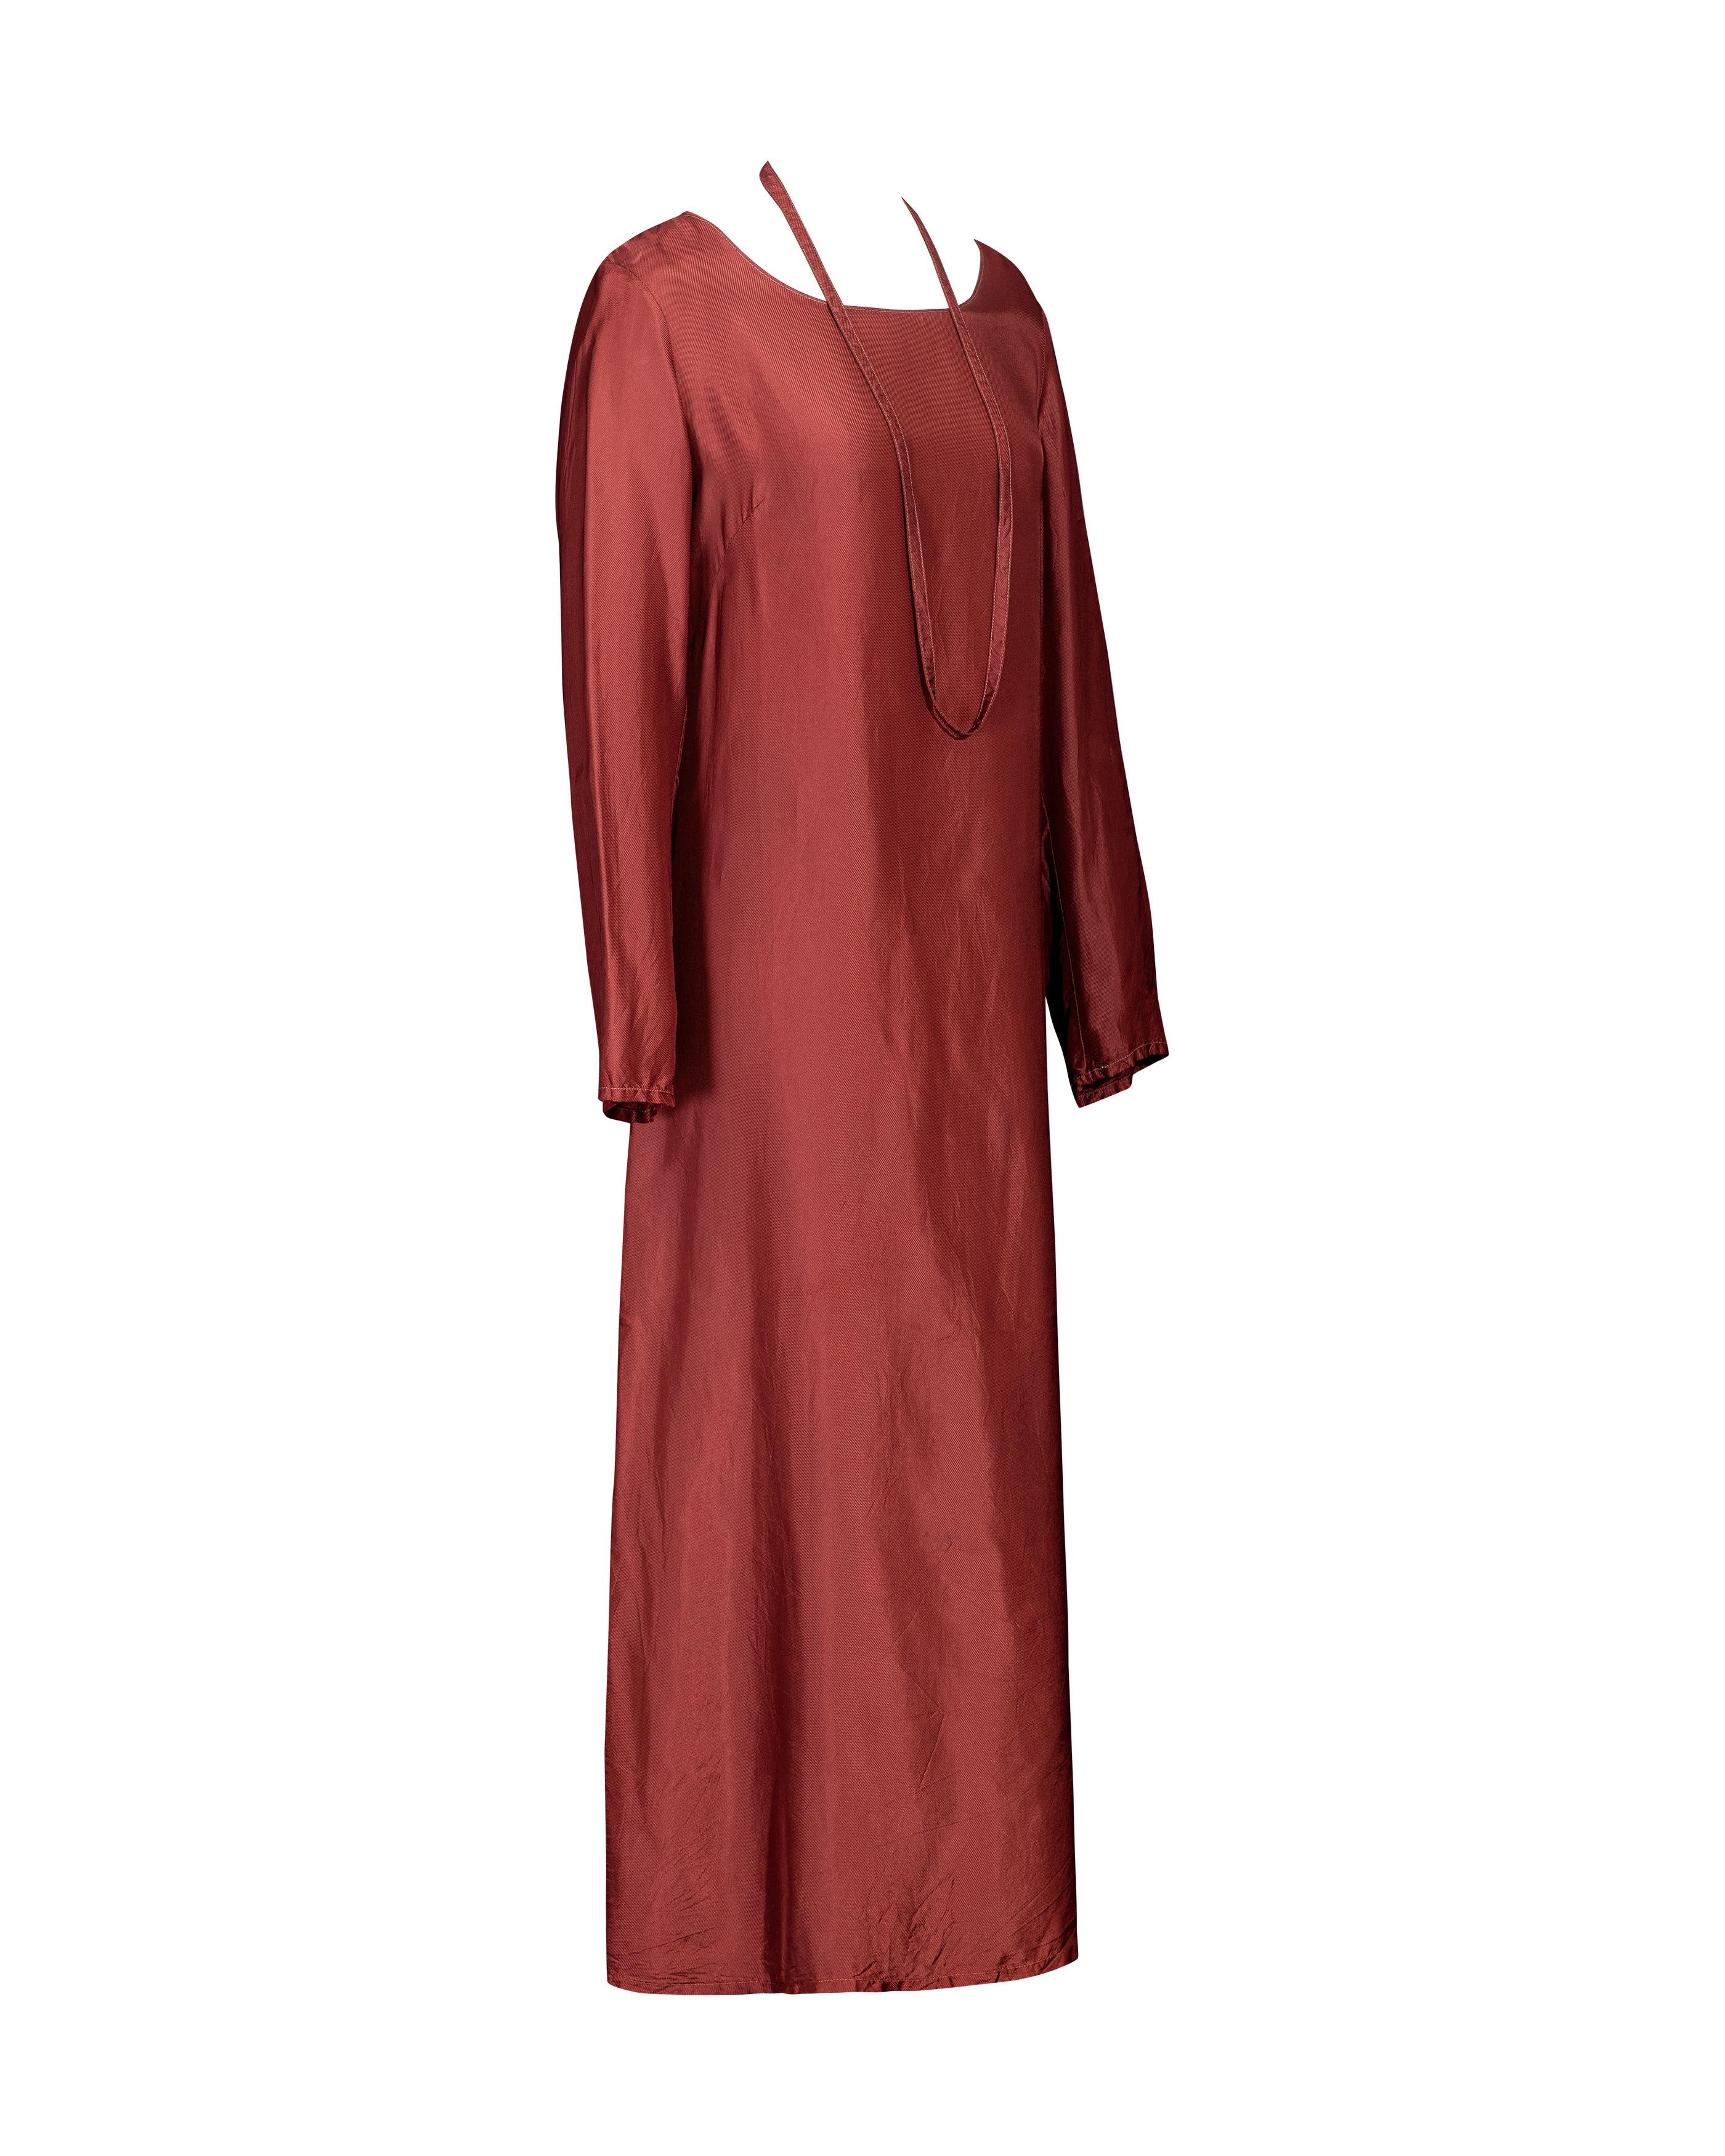 A/W 1999 Maison Martin Margiela Deep Rust Color-way 'Lining' Long Sleeve Dress In Excellent Condition For Sale In North Hollywood, CA